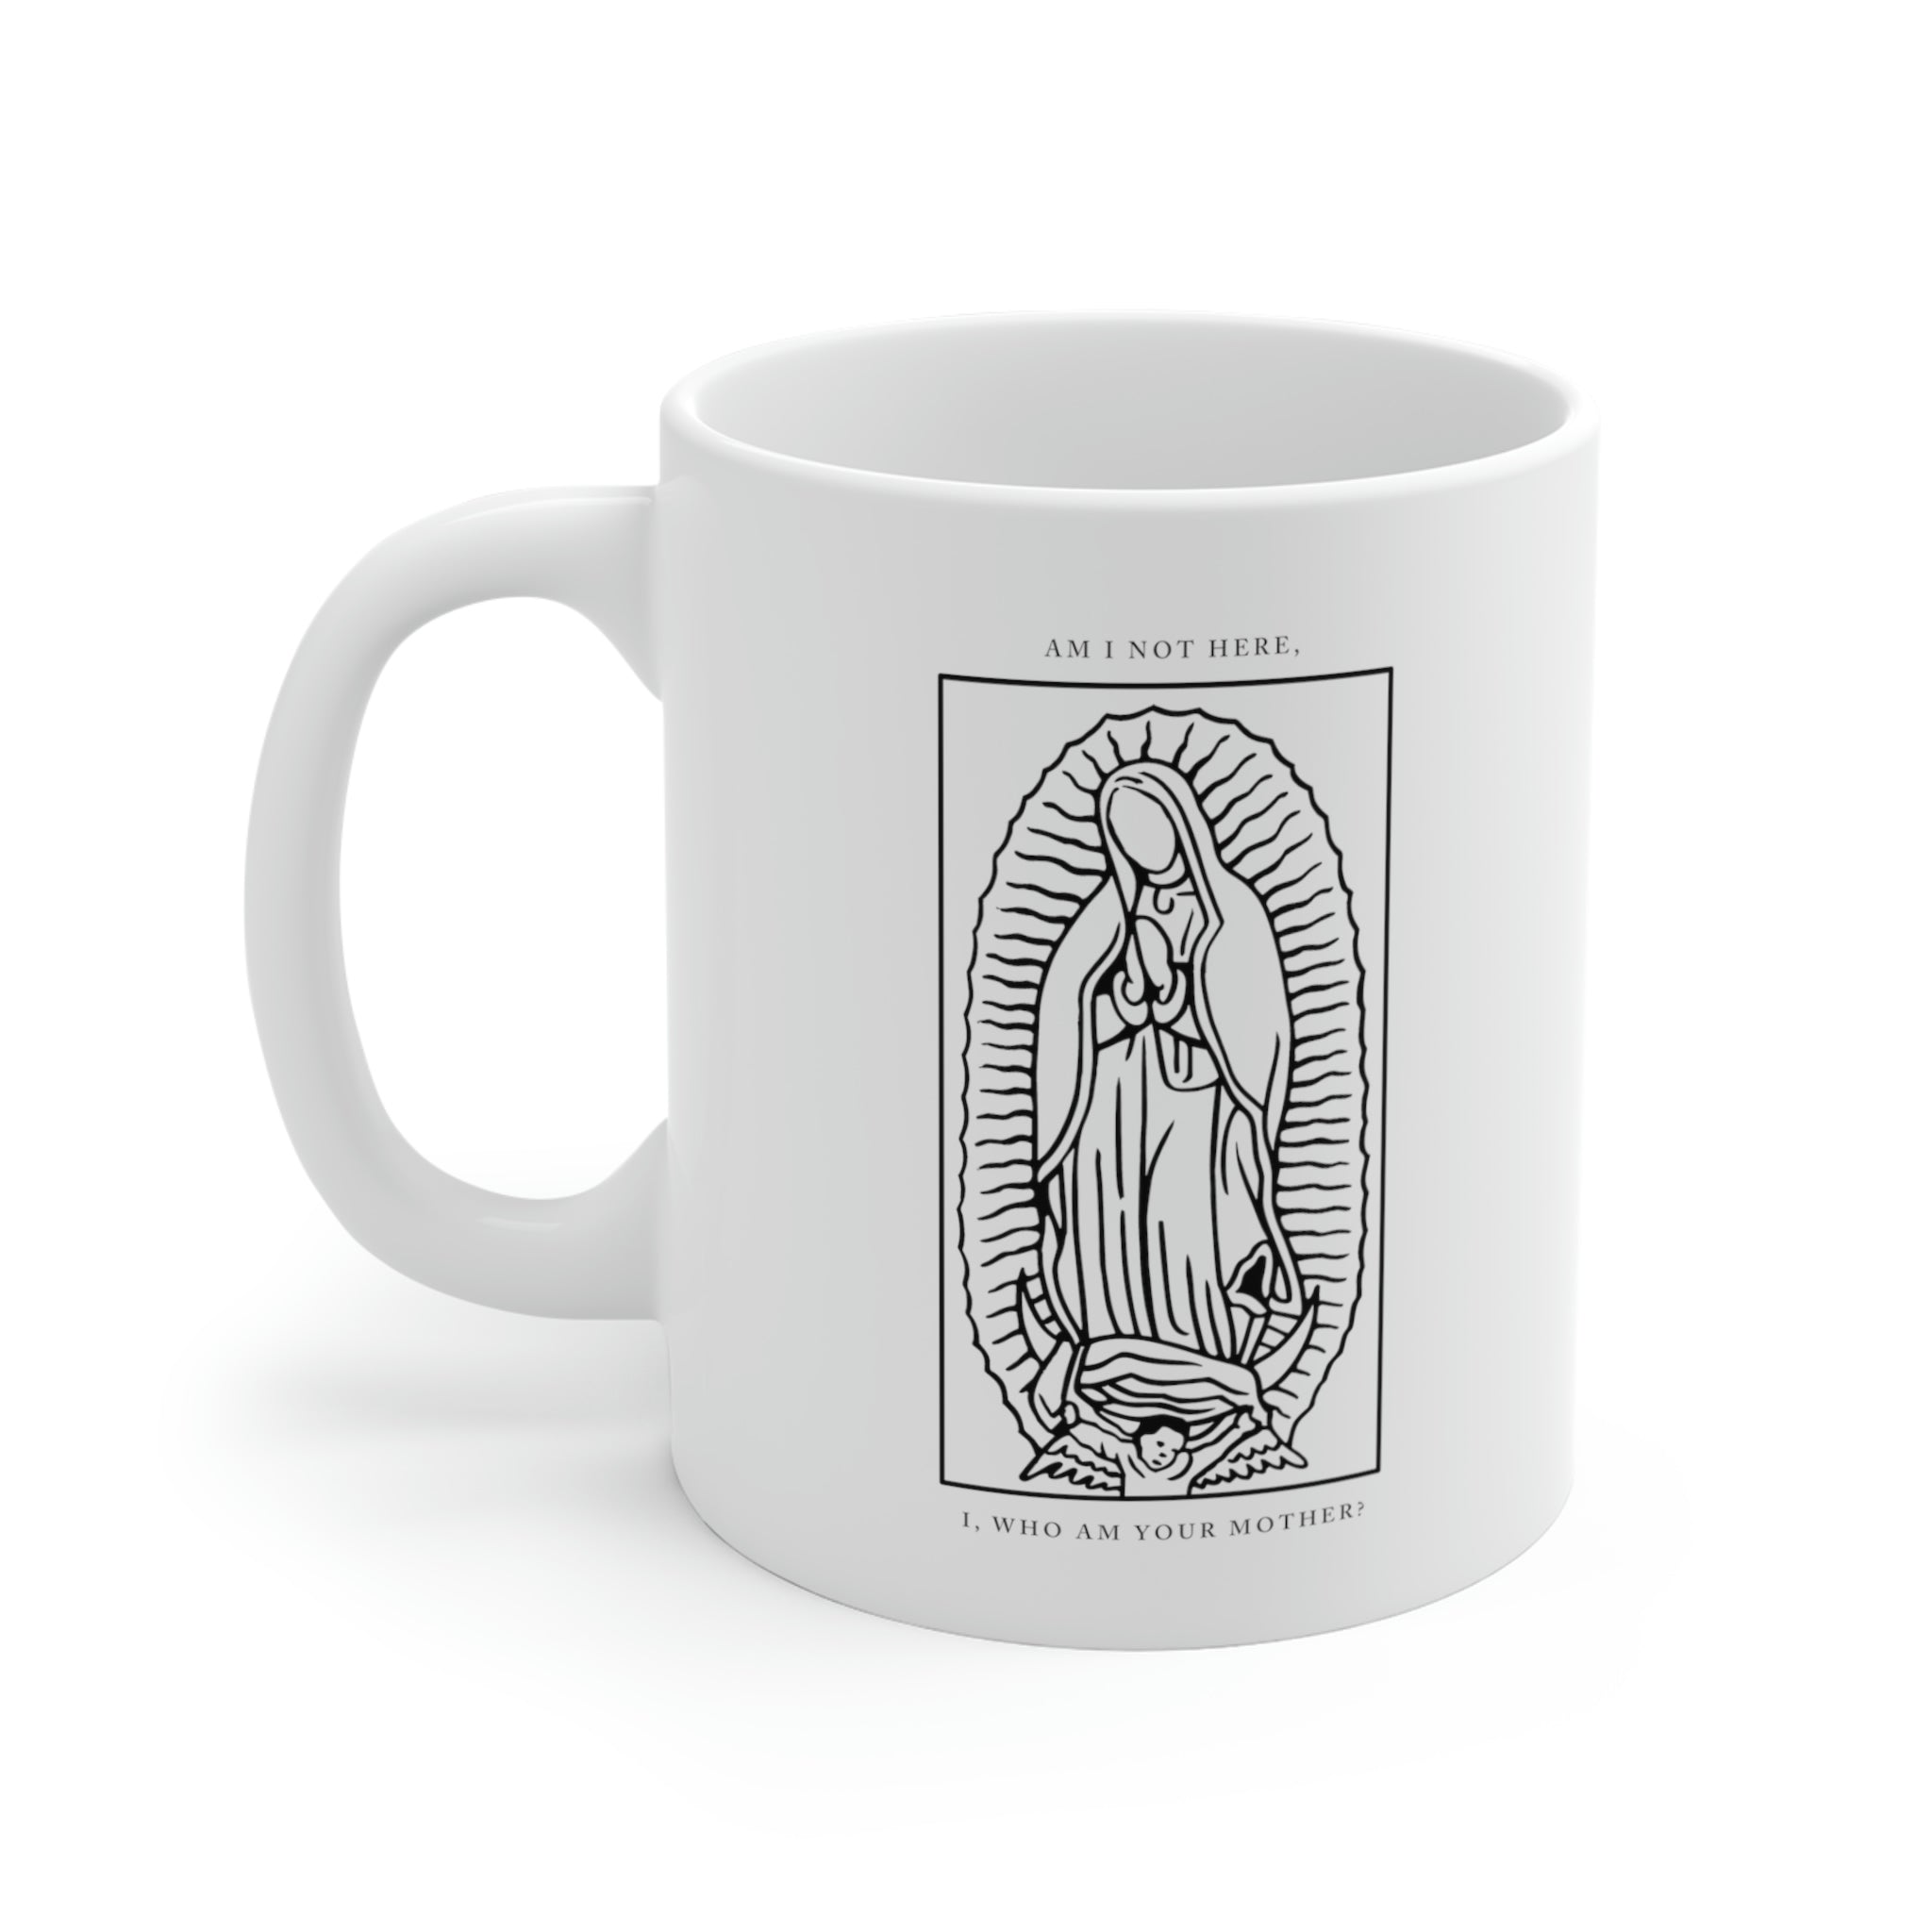 Our Lady of Guadalupe Coffee Mug